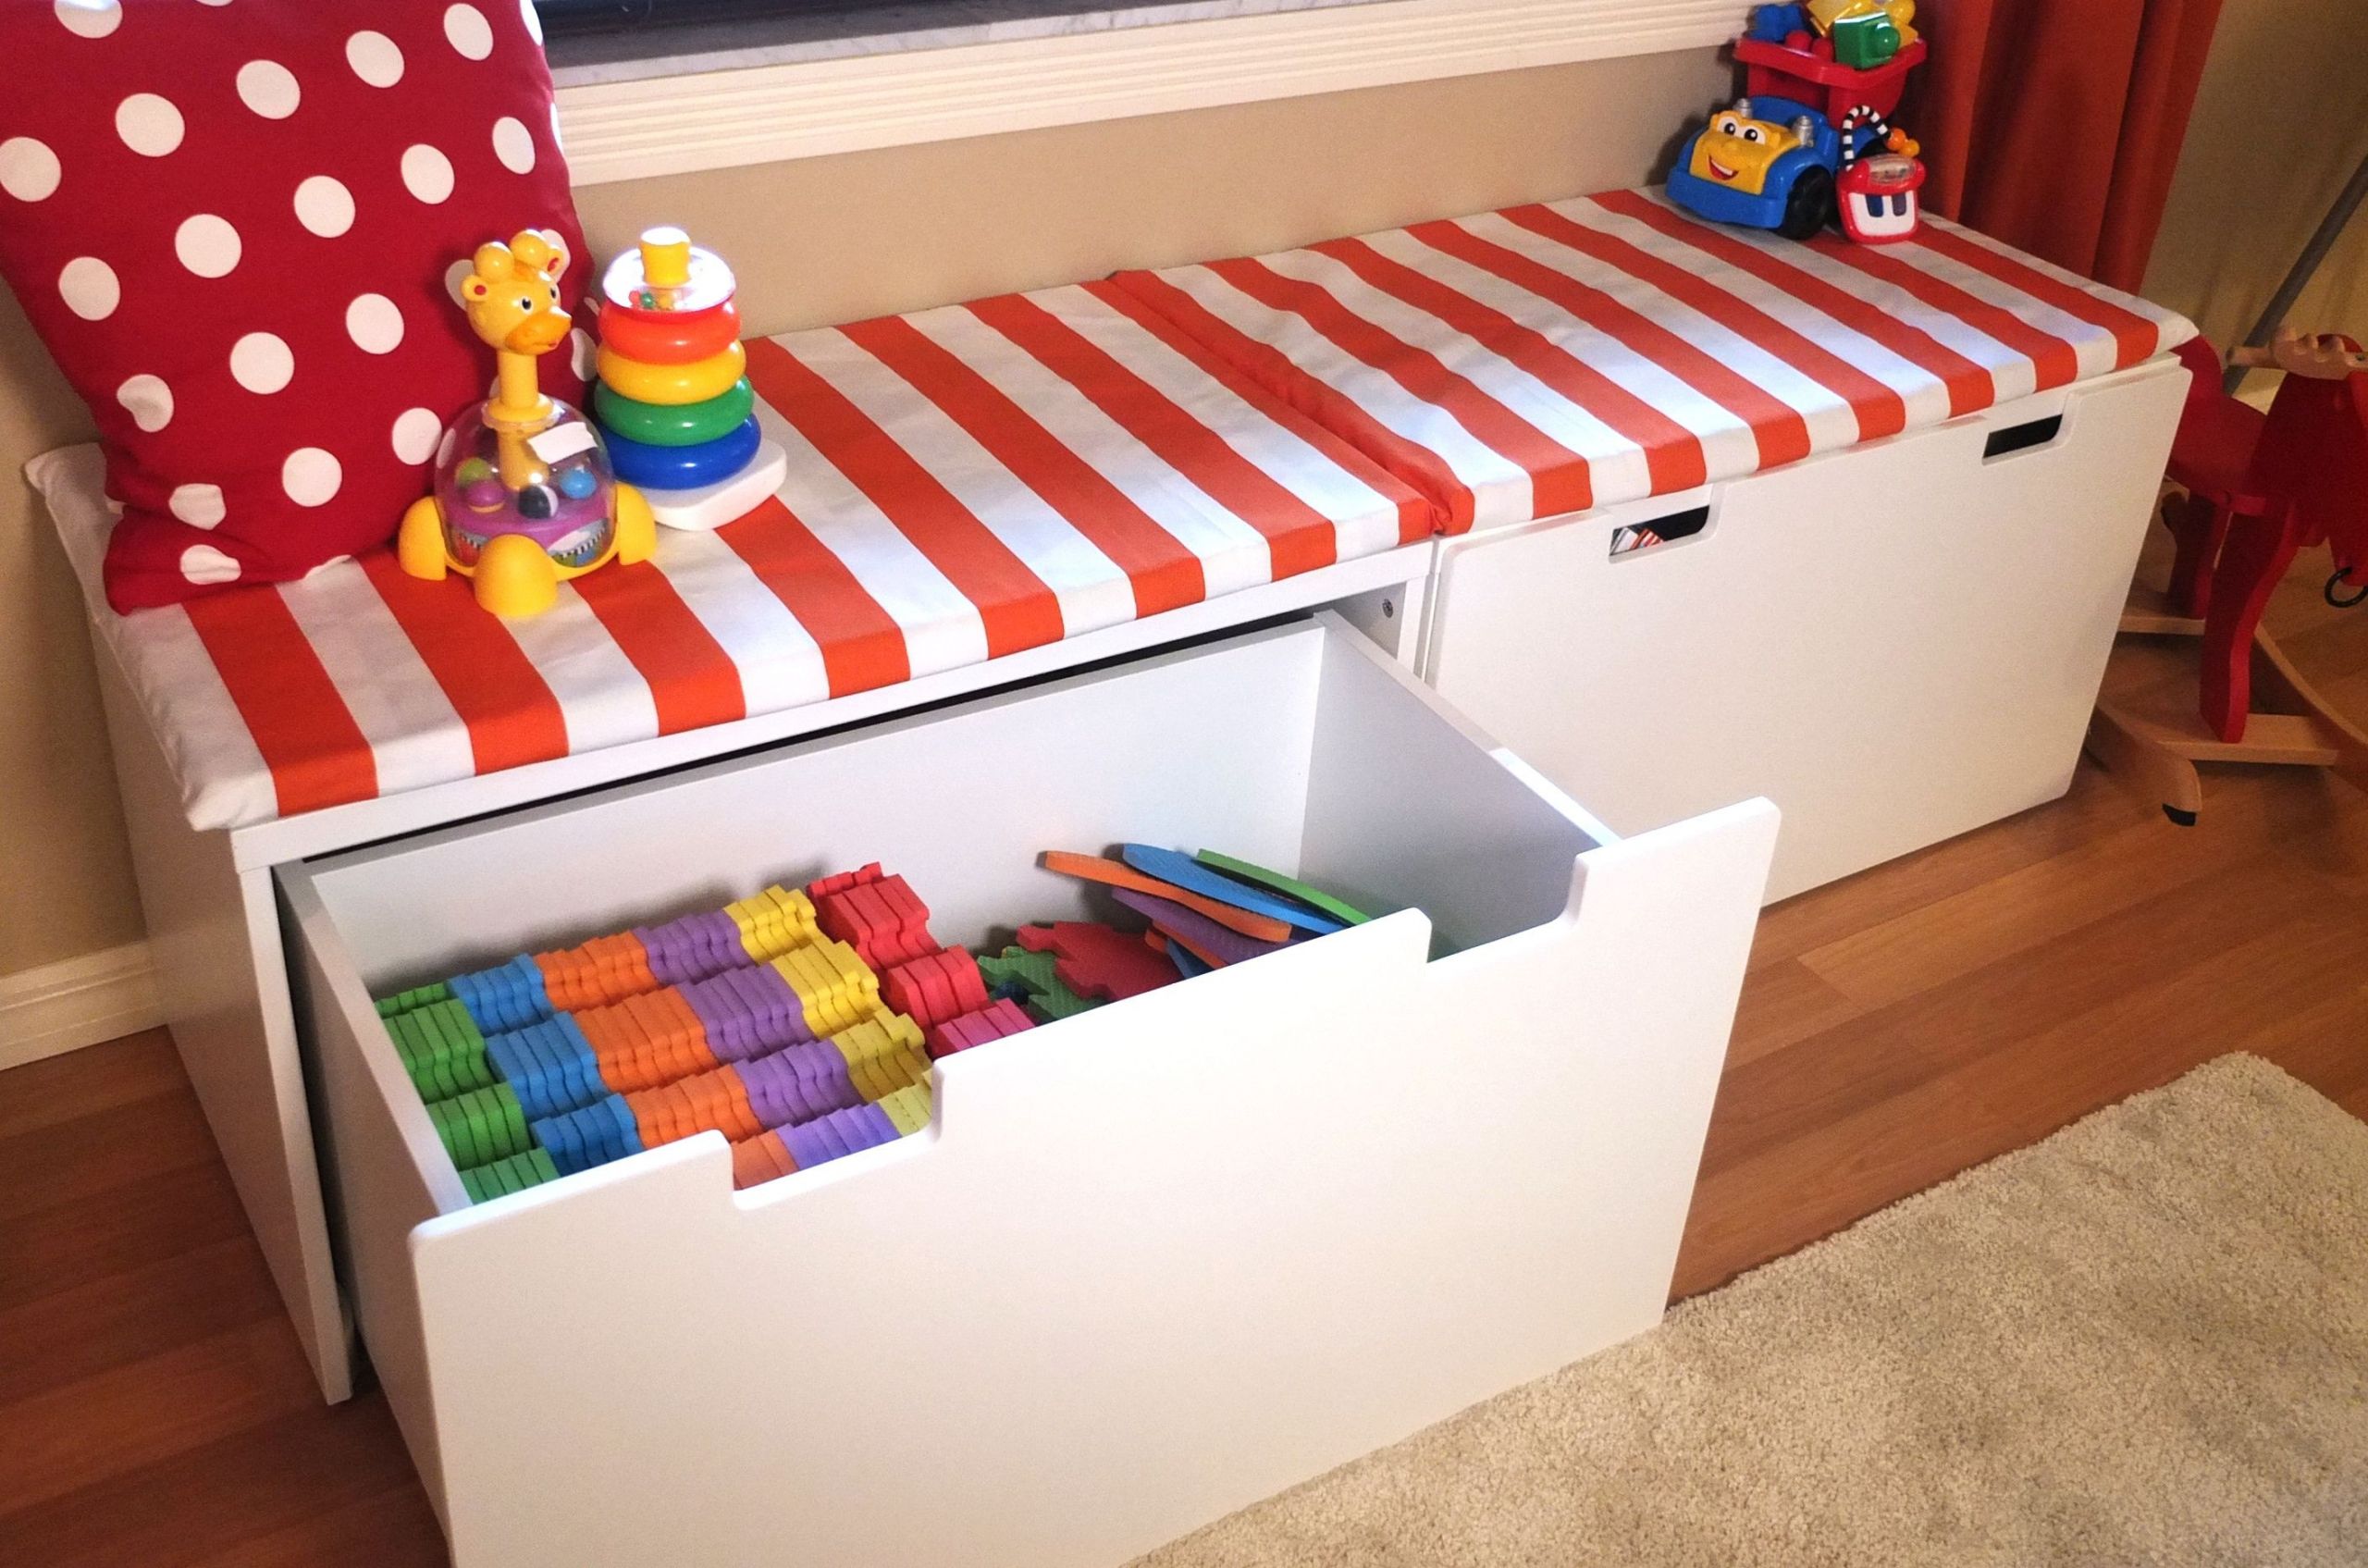 Storage Bench For Kids Room
 The STUVA storage bench provides a fortable window seat